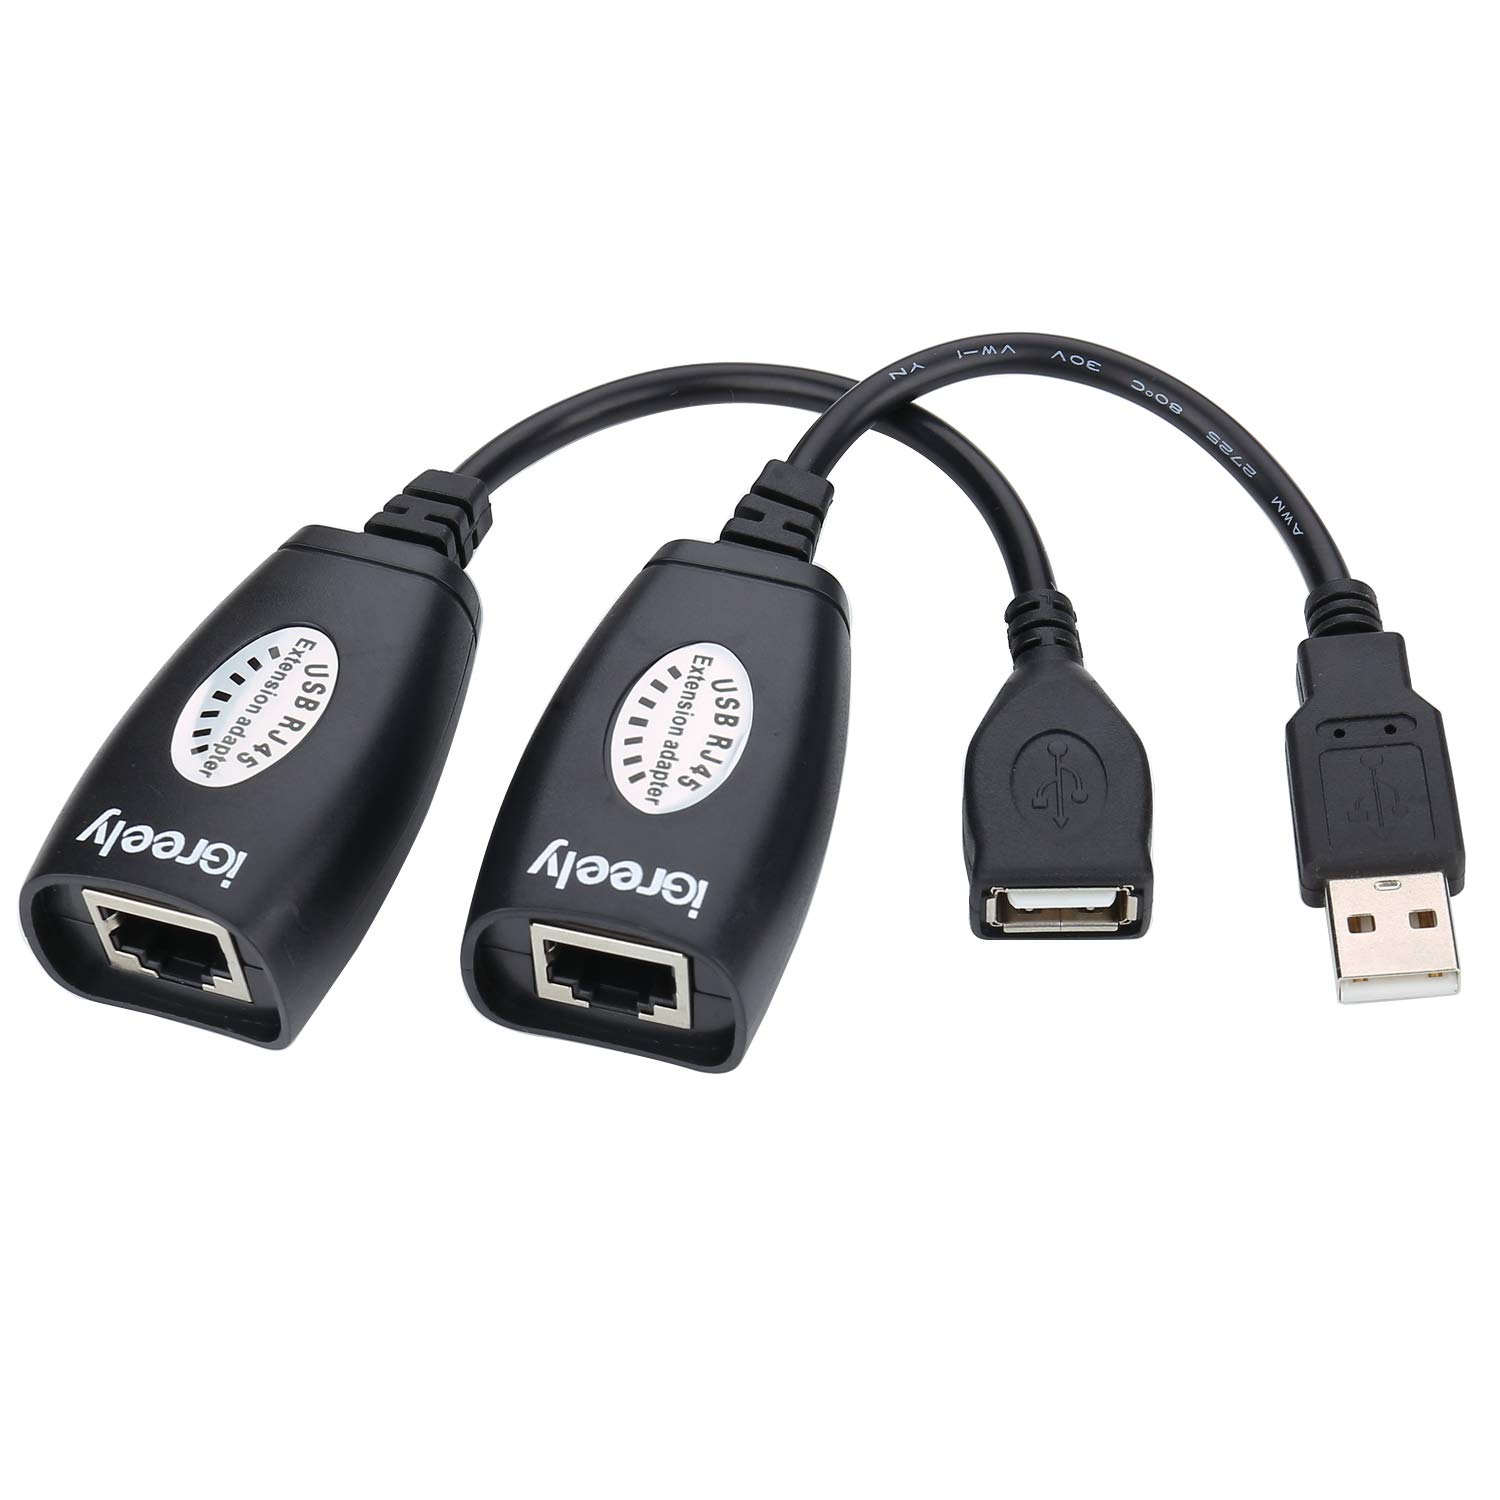 USB RJ45 Extender - Best Electronic Products Natcom Online Store